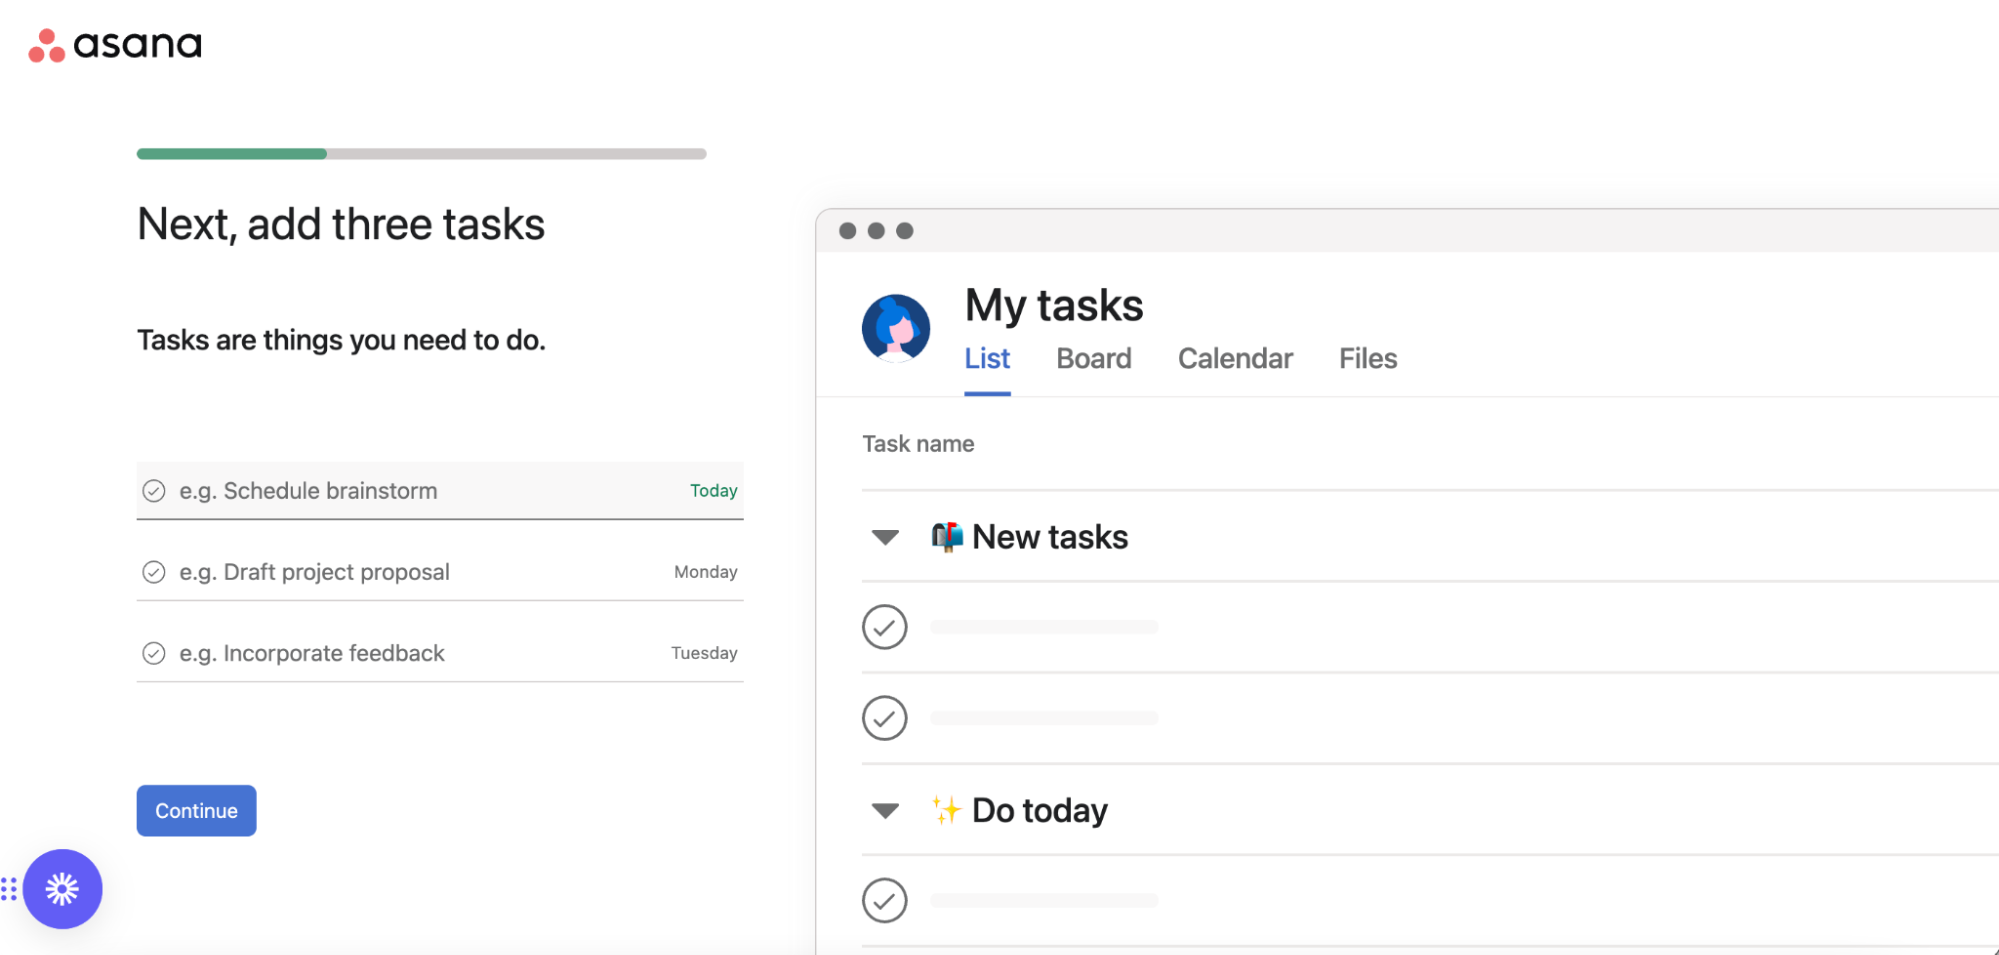 asana product onboarding - prompting user to add three tasks